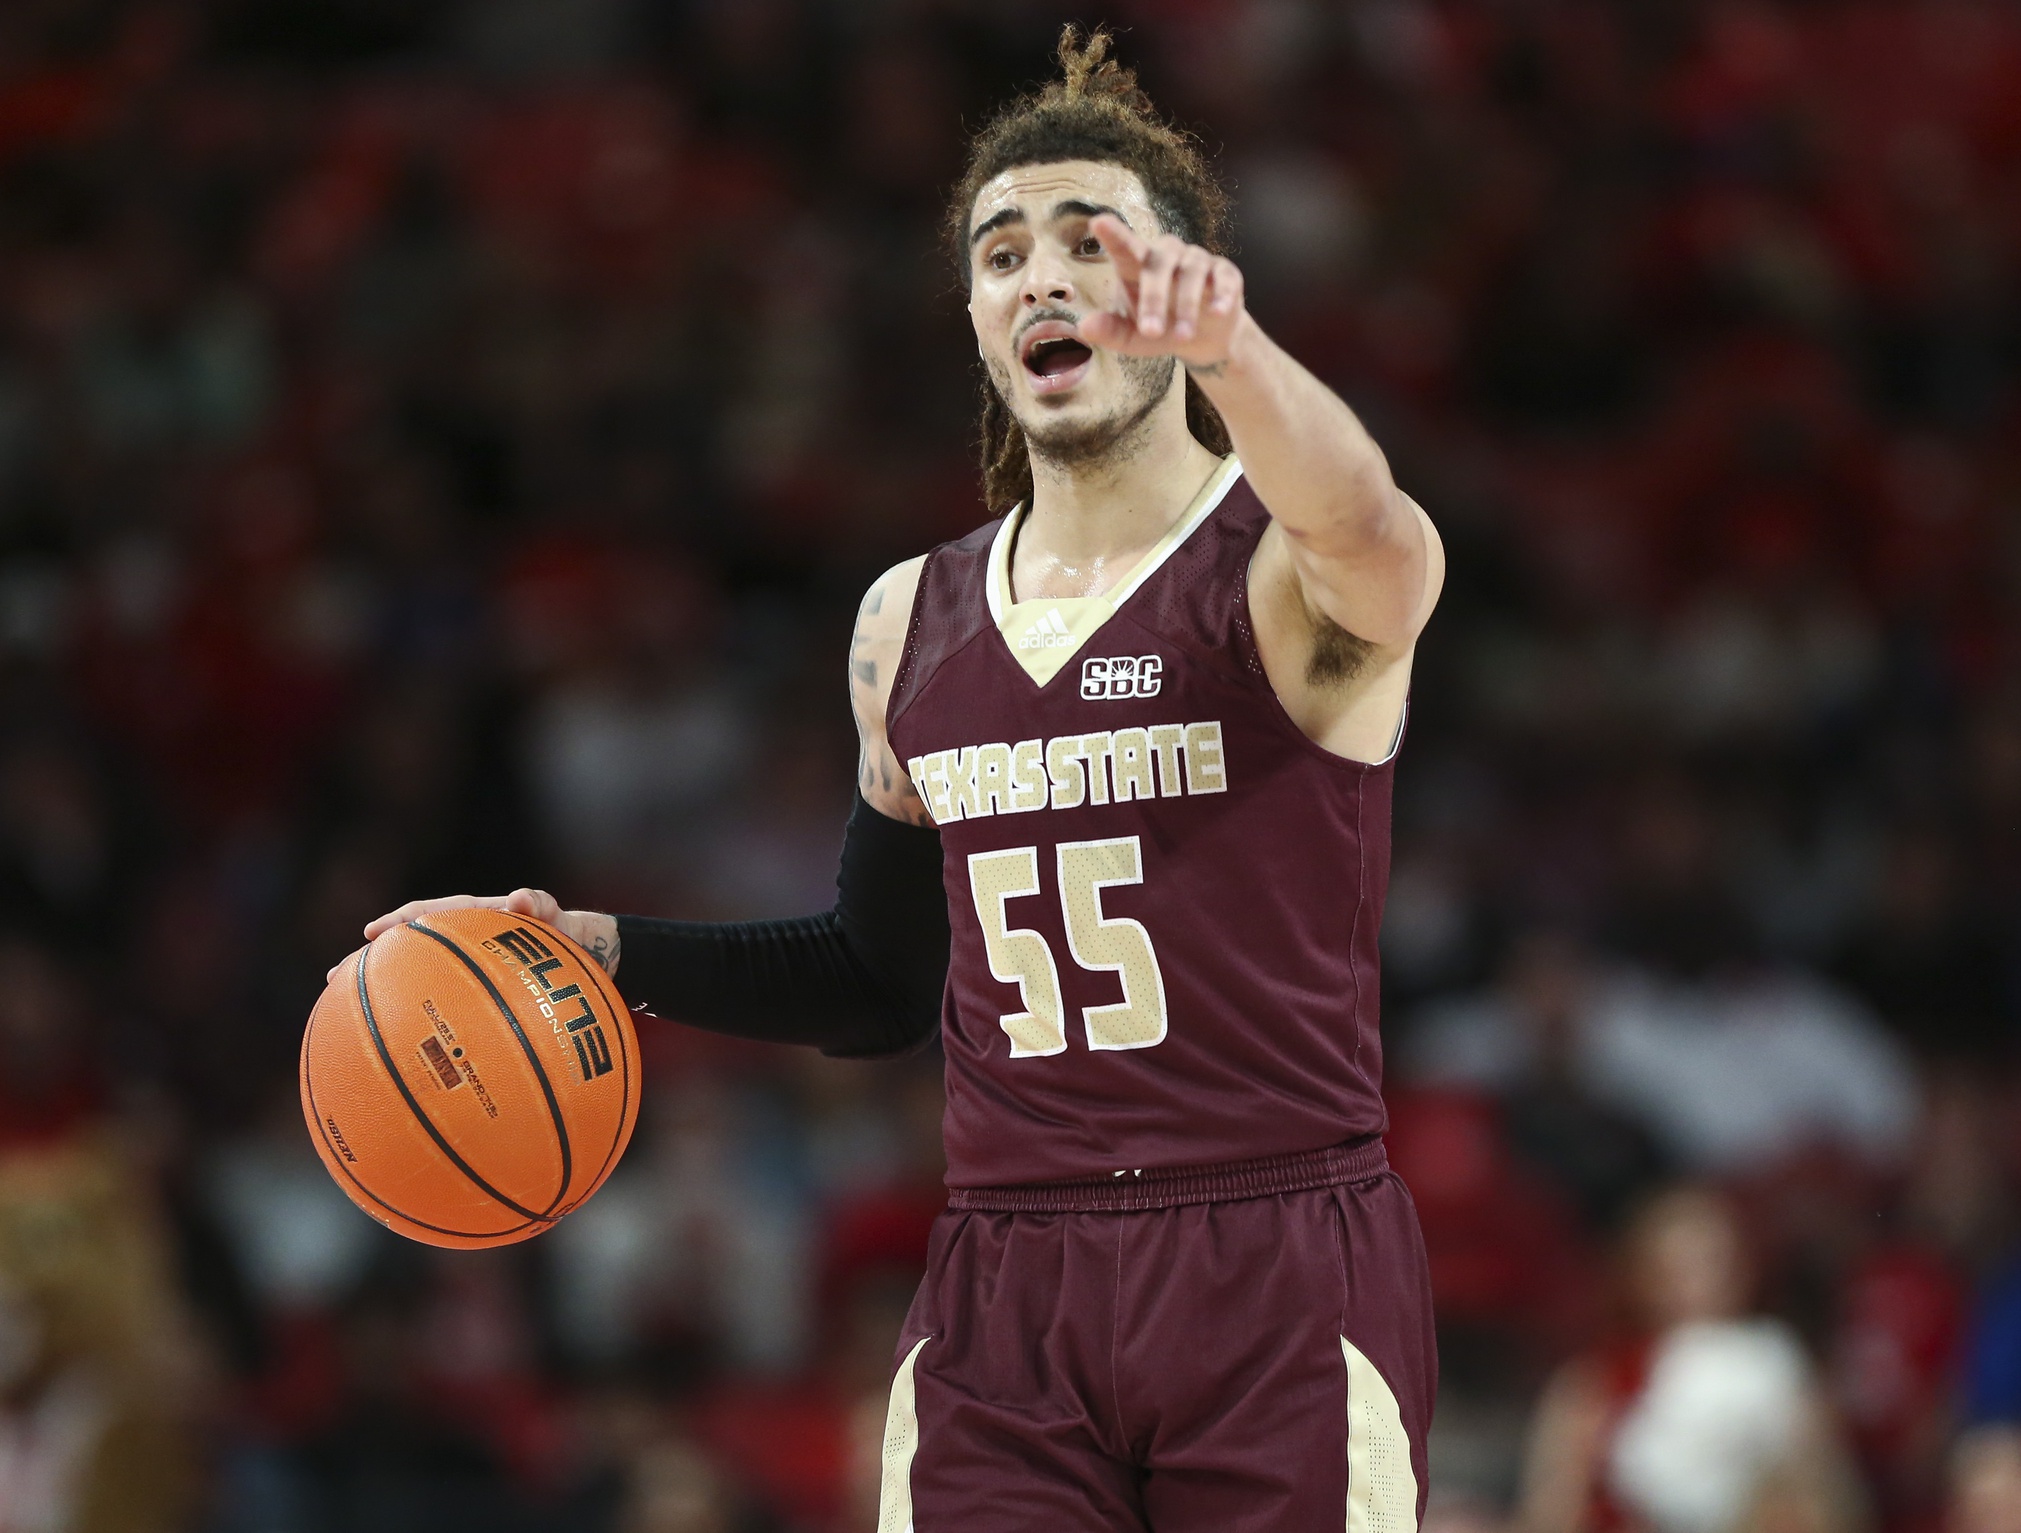 Texas State Bobcats vs Southern Miss Golden Eagles Prediction, 1/28/2023 College Basketball Picks, Best Bets & Odds